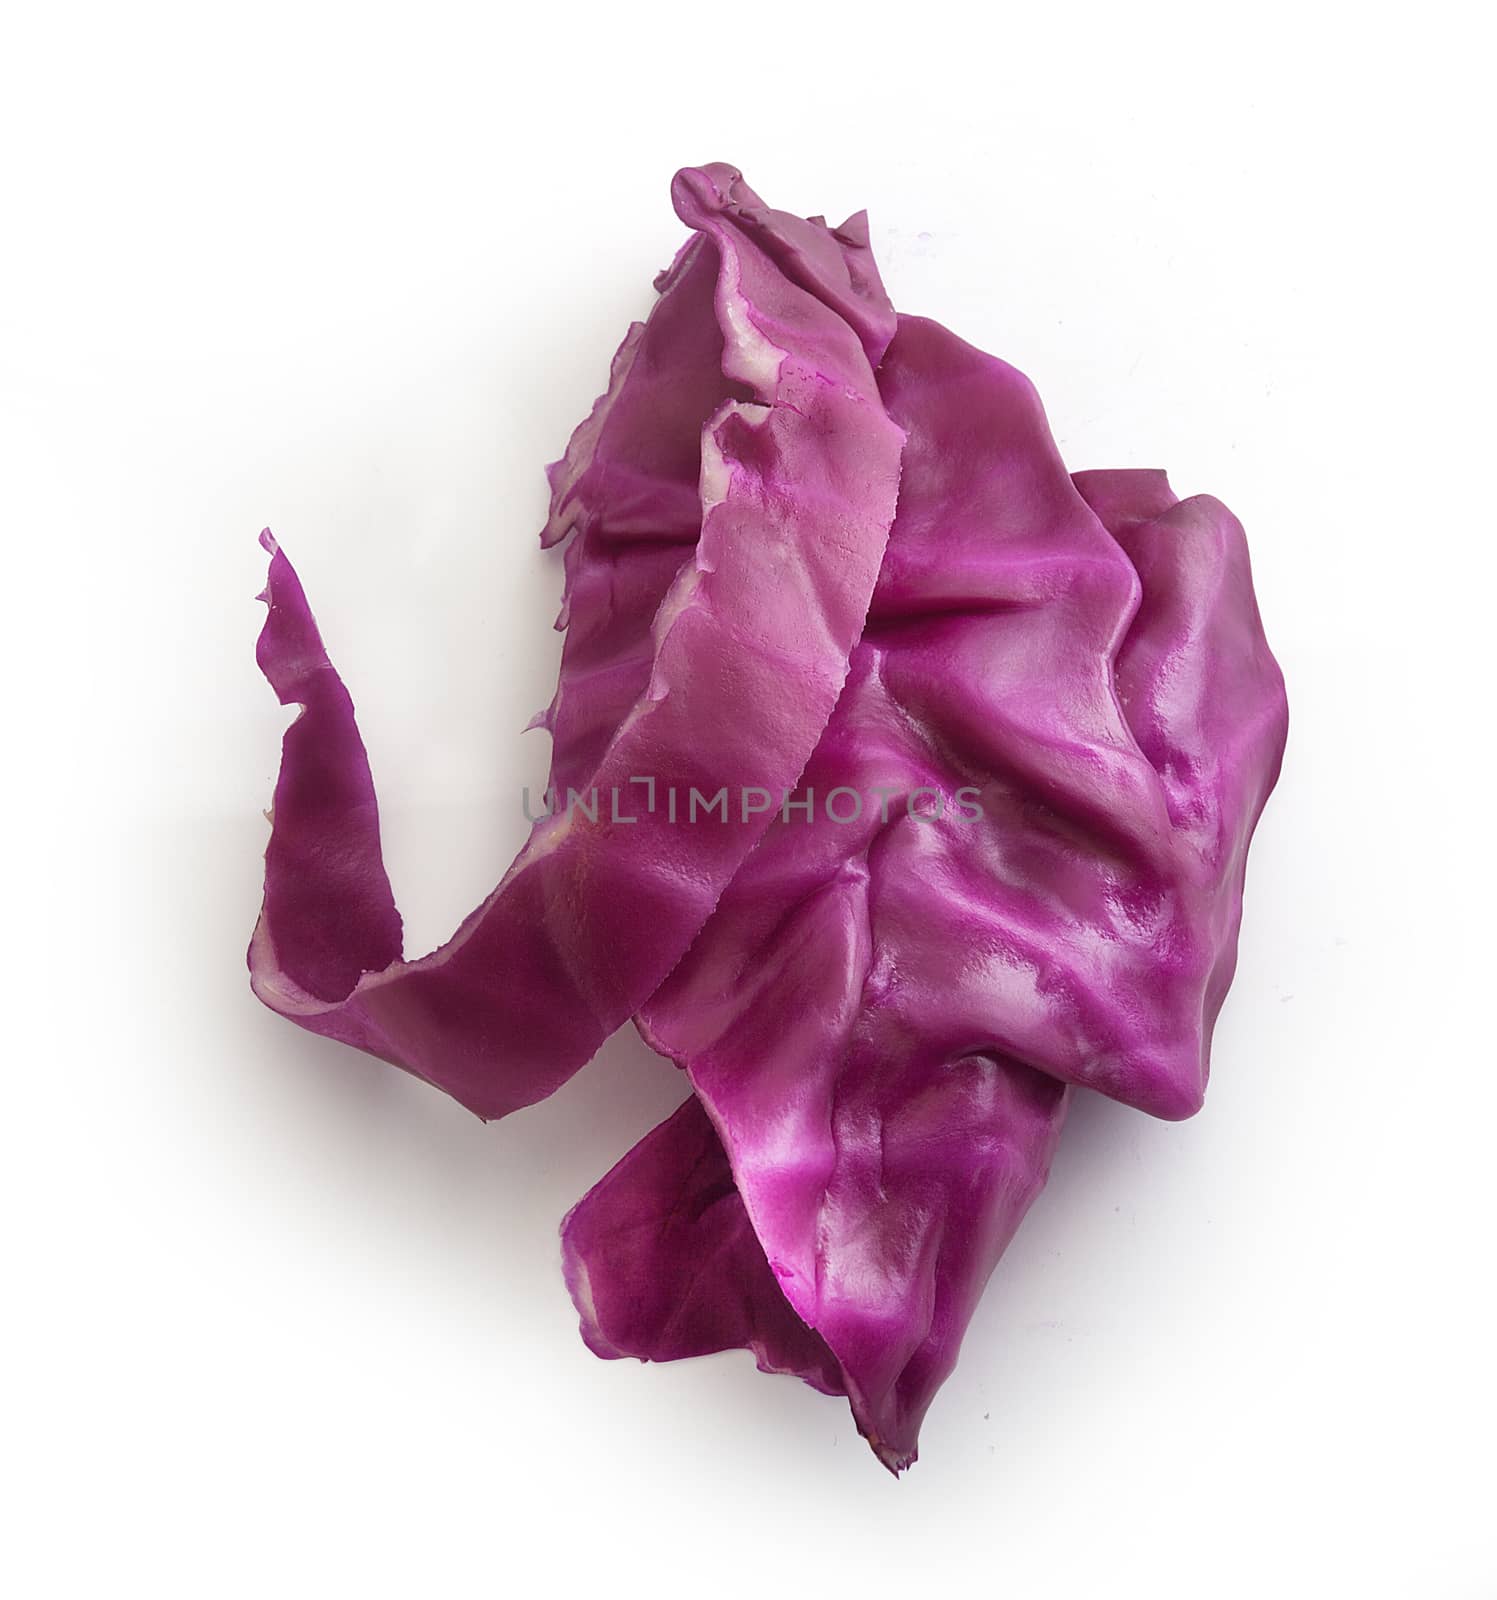 Sliced red cabbage by Angorius